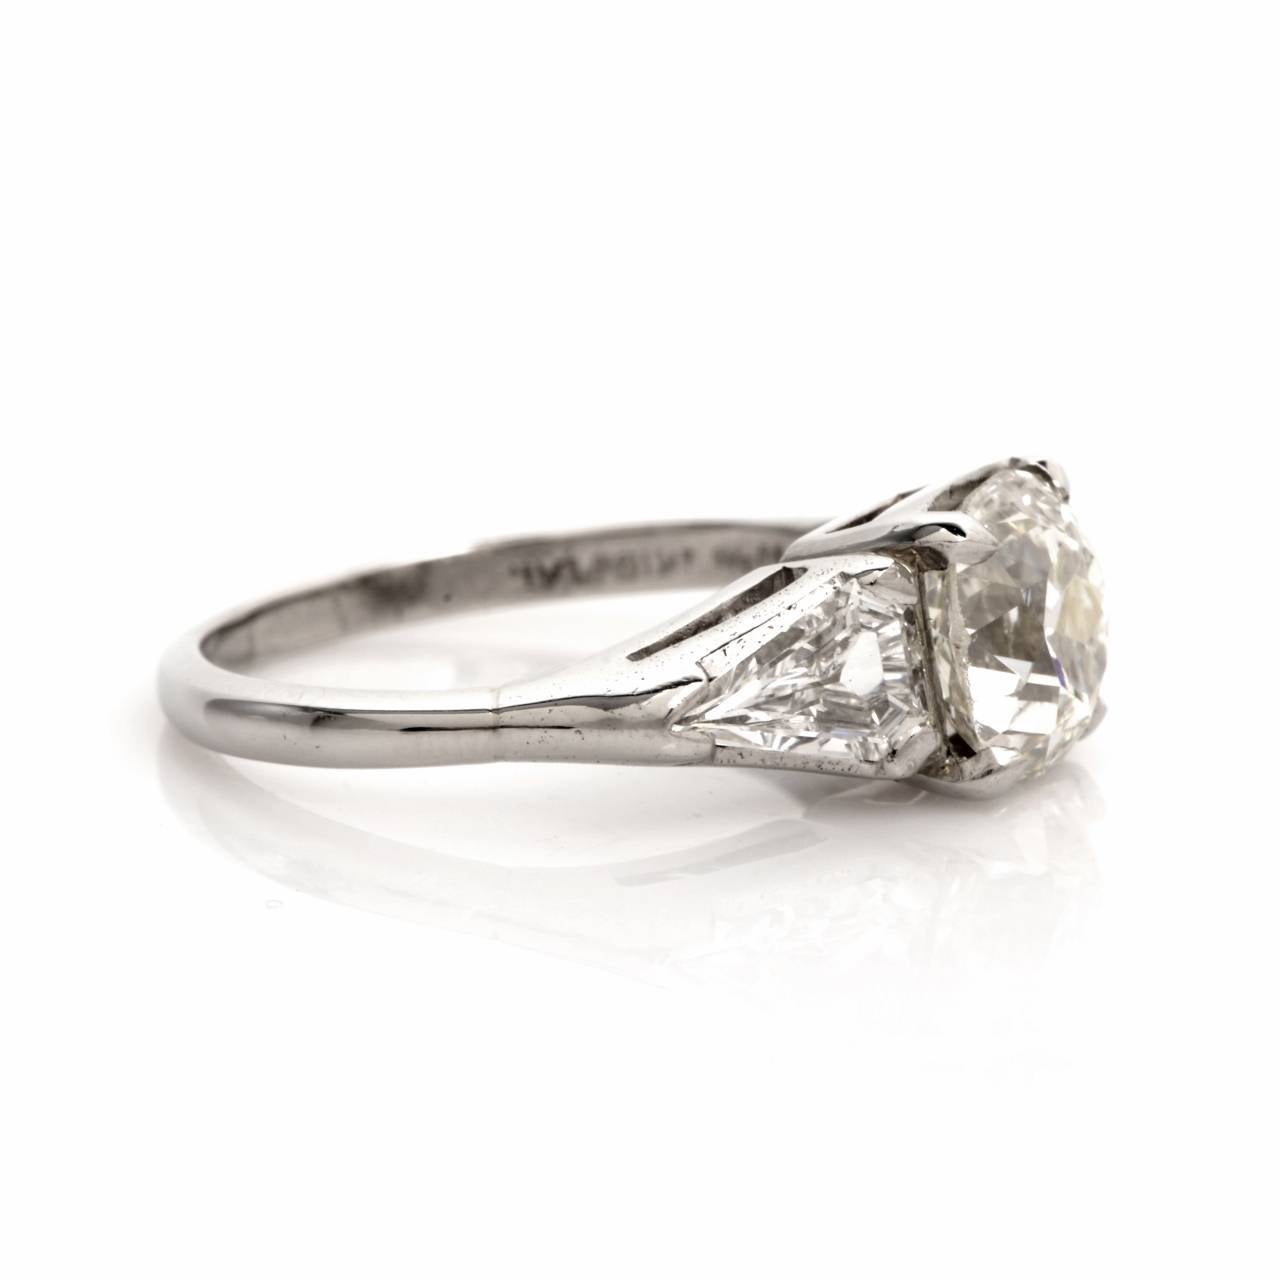 This alluring engagement ring is crafted in solid platinum, weighs approx. 4.8 grams and measures approx. 7.5 mm x 7 mm. Classically elegant  in design, this vintage engagement ring exposes a fiery old mine cut diamond weighing approx. 1.77 cts,